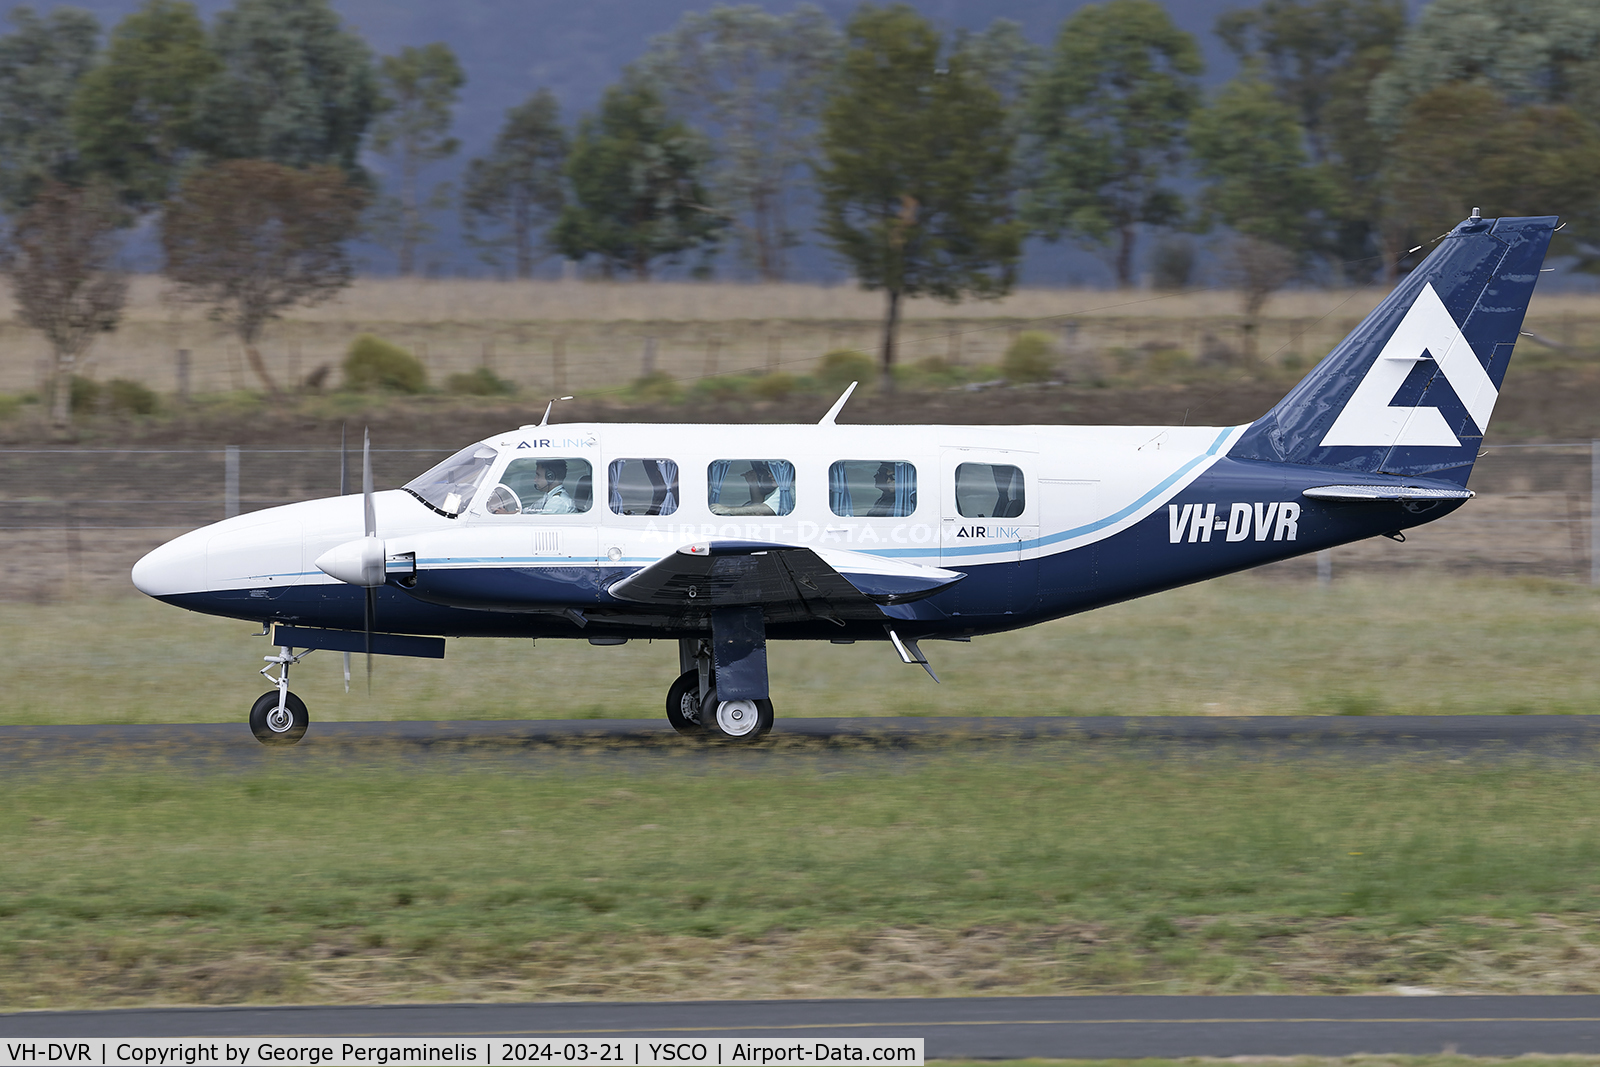 VH-DVR, 1979 Piper PA-31-350 Chieftain C/N 31-7952052, Departing for Bankstown, Sydney.